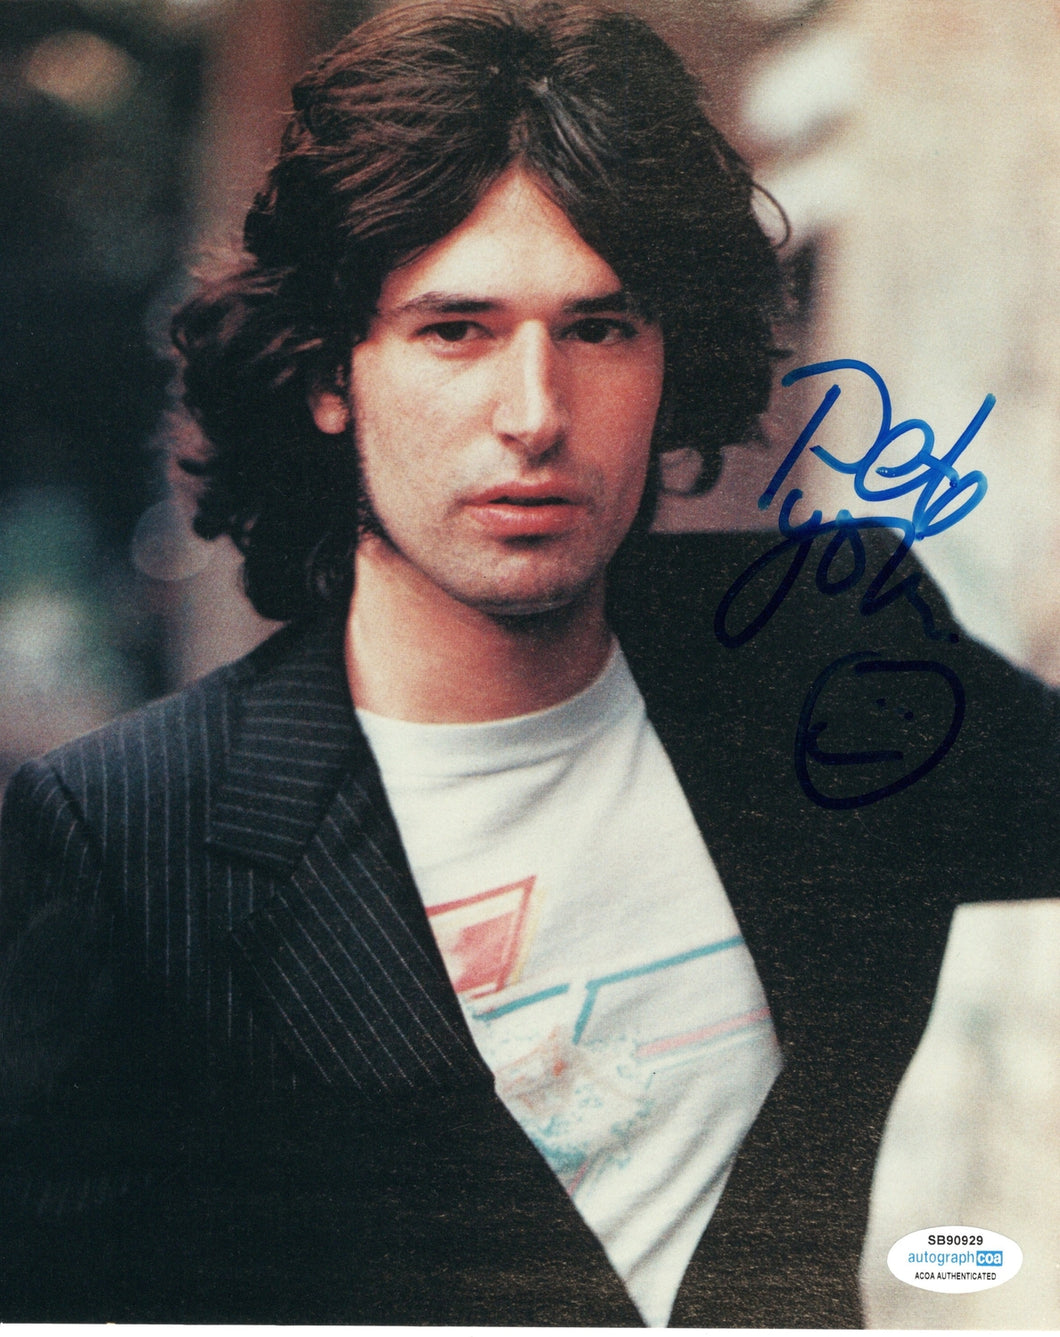 Pete Yorn Autographed Signed 8x10 Rock Star Photo